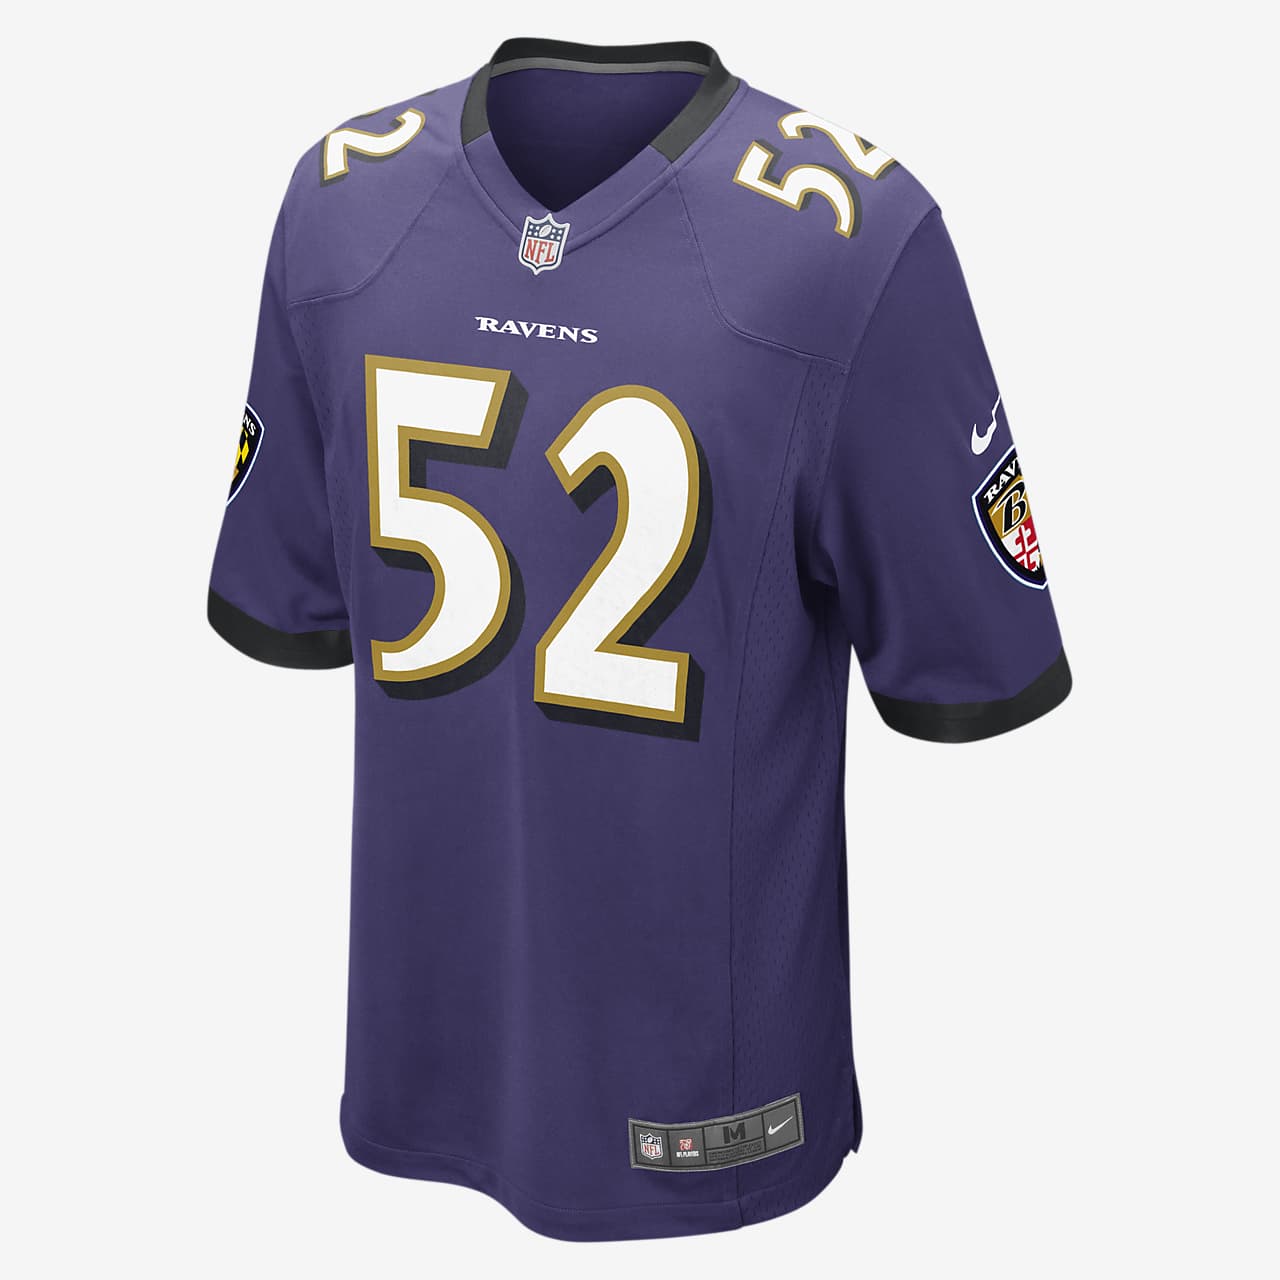 NFL Baltimore Ravens (Ray Lewis) Men's Football Home Game Jersey